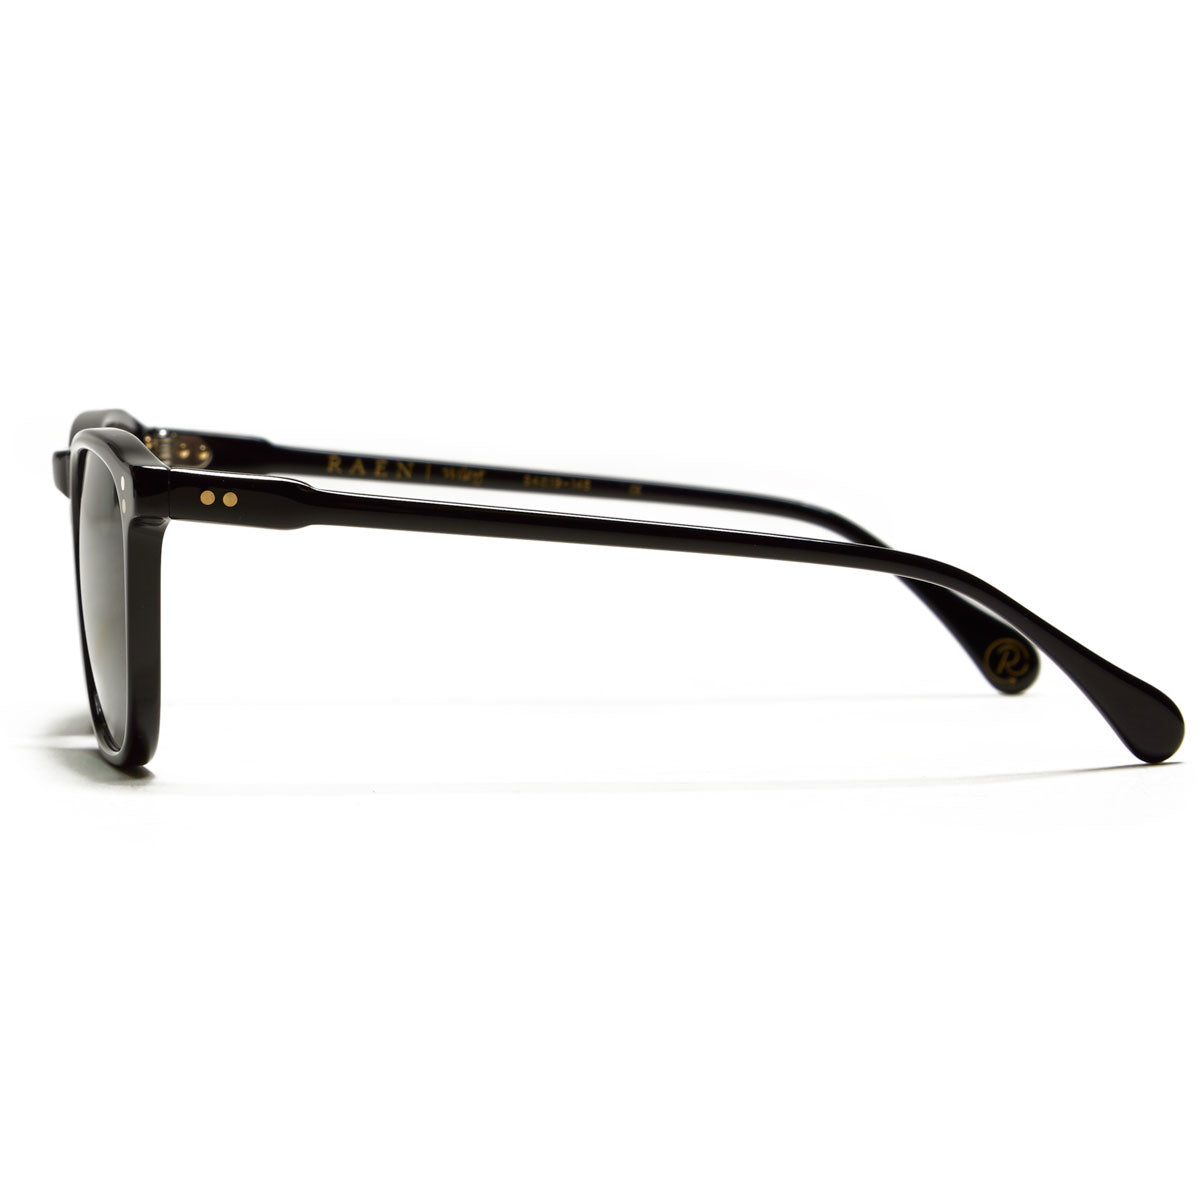 Raen Wiley 54 Sunglasses - Recycled Black/Green Polarized image 2